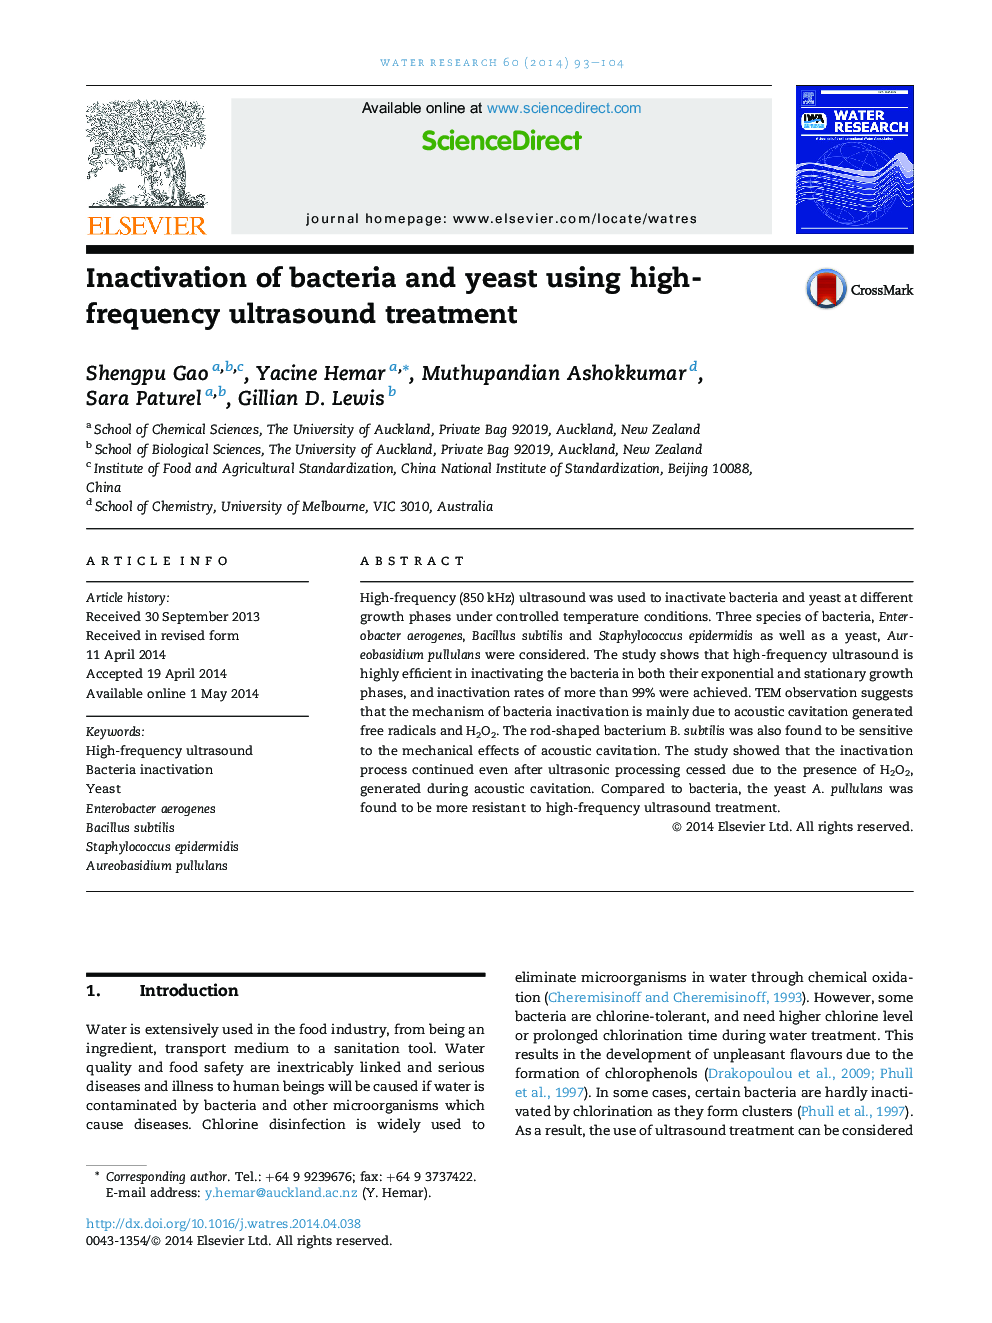 Inactivation of bacteria and yeast using high-frequency ultrasound treatment